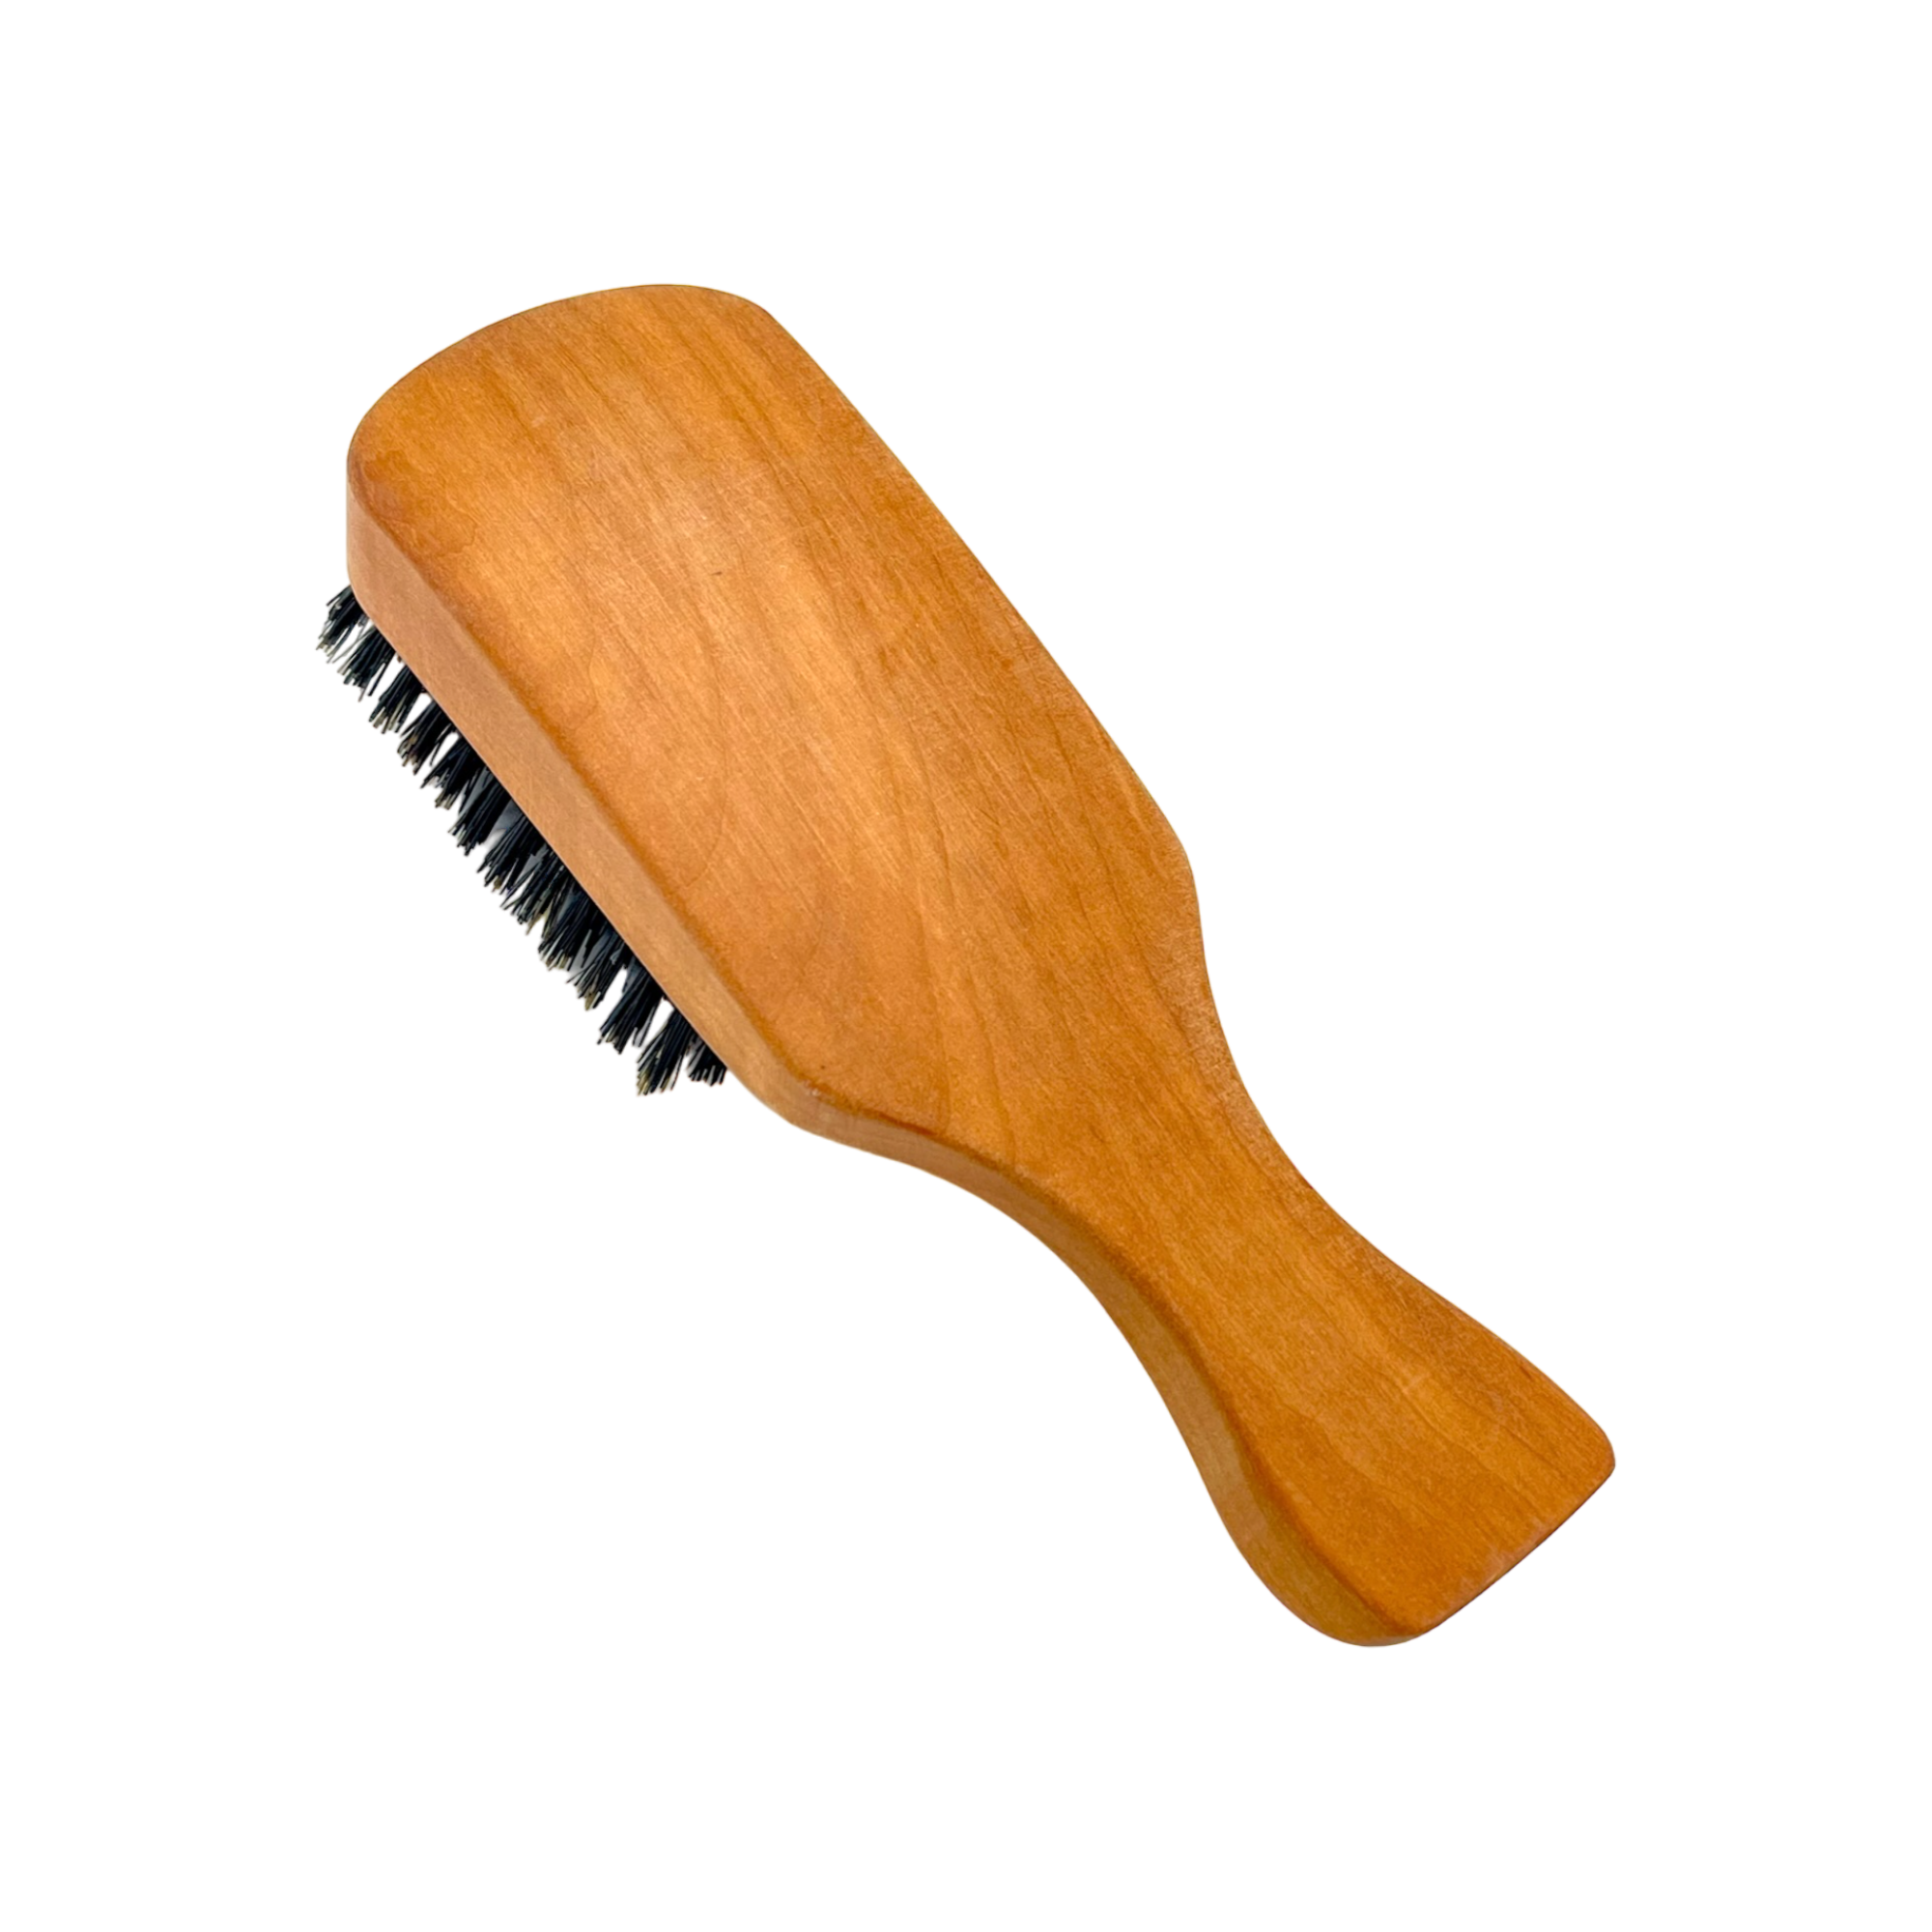 Dural Pear wood men's brush with wild boar bristles